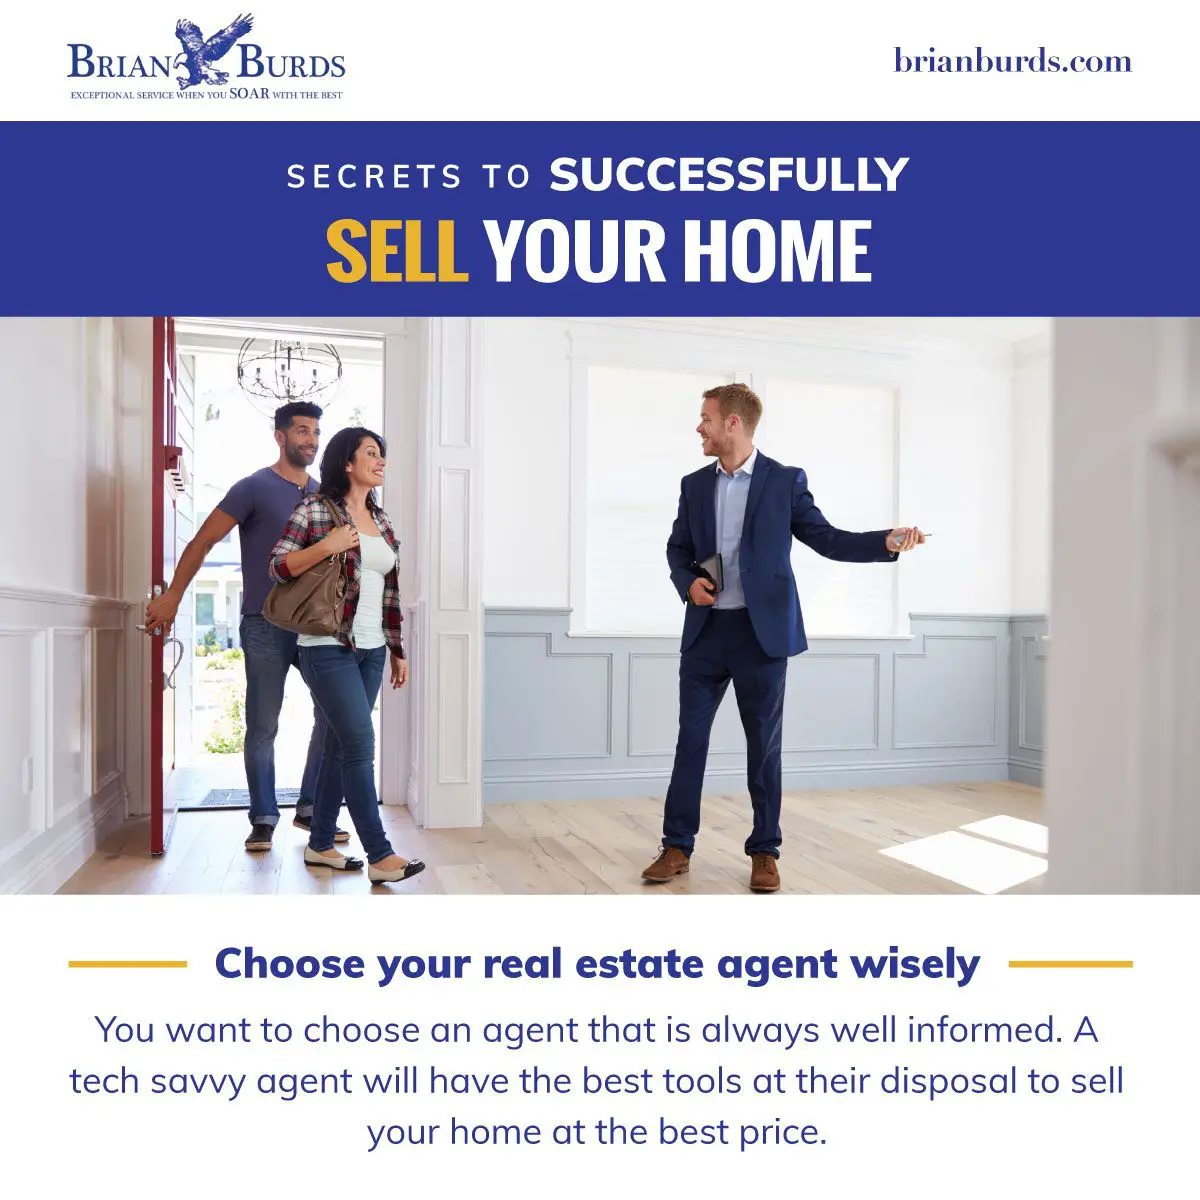 A good real estate agent really is key to selling your home. The Brian ...